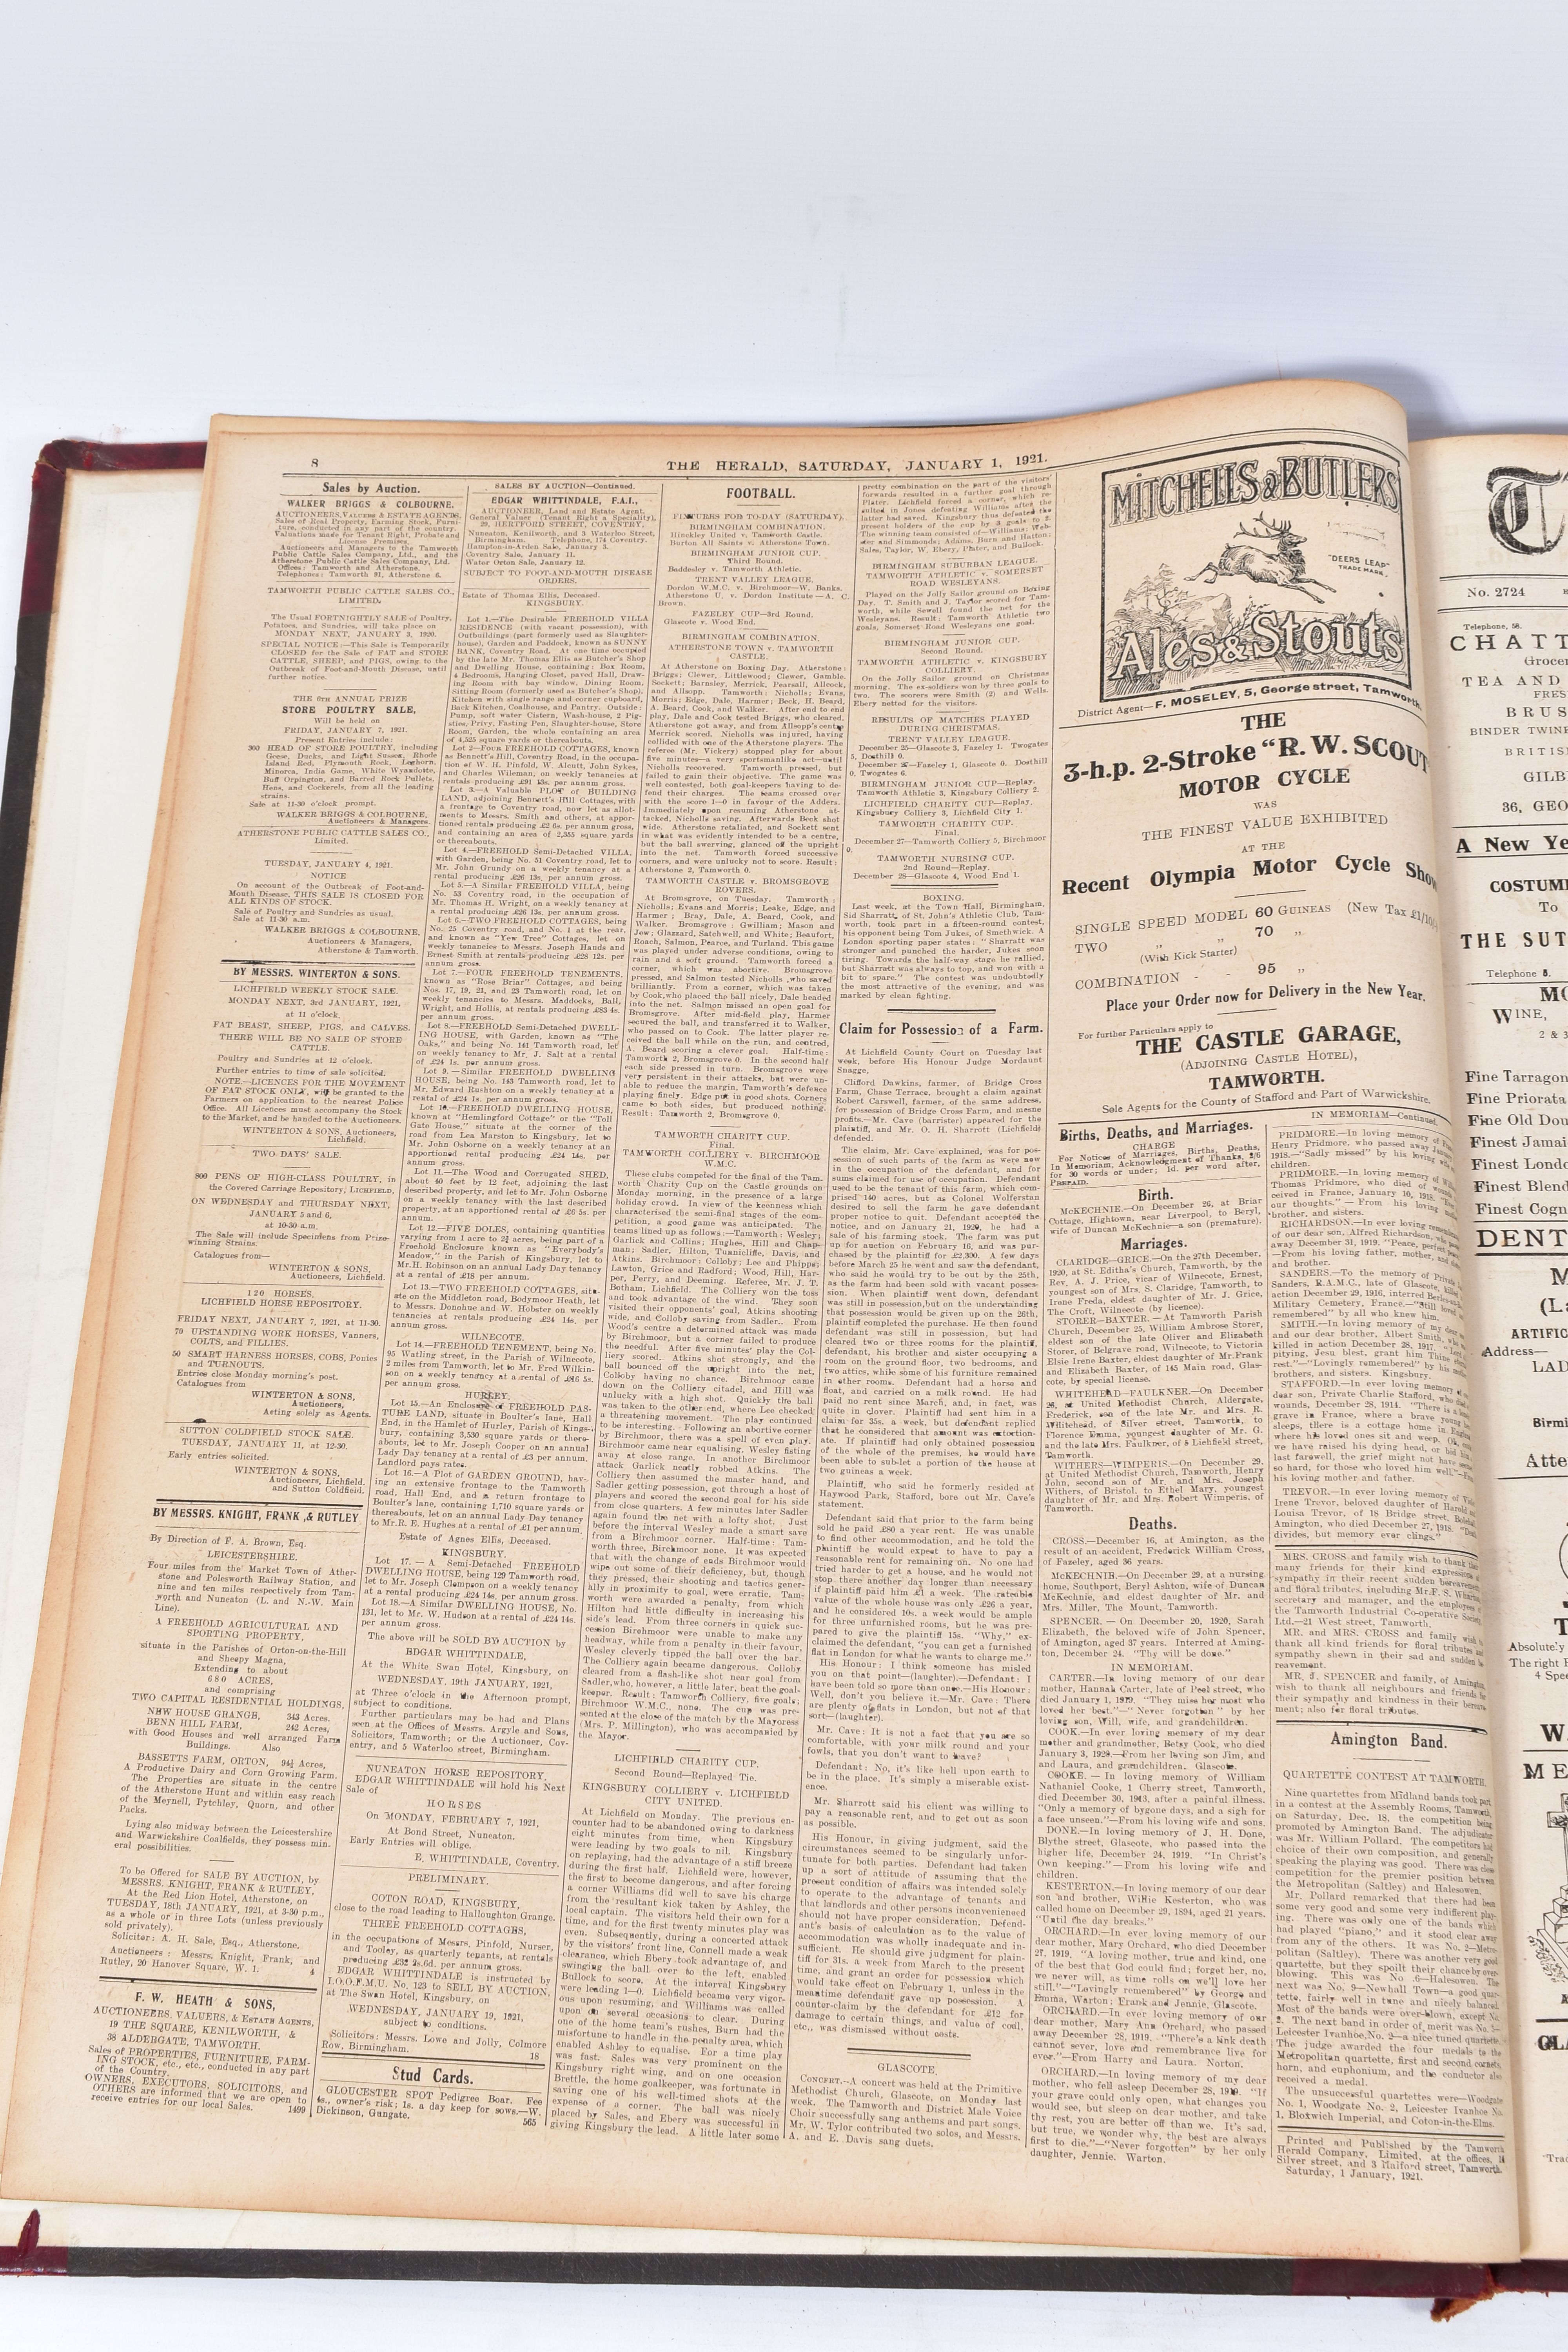 THE TAMWORTH HERALD, an Archive of the Tamworth Herald Newspaper from 1921, the newspapers are bound - Image 4 of 8